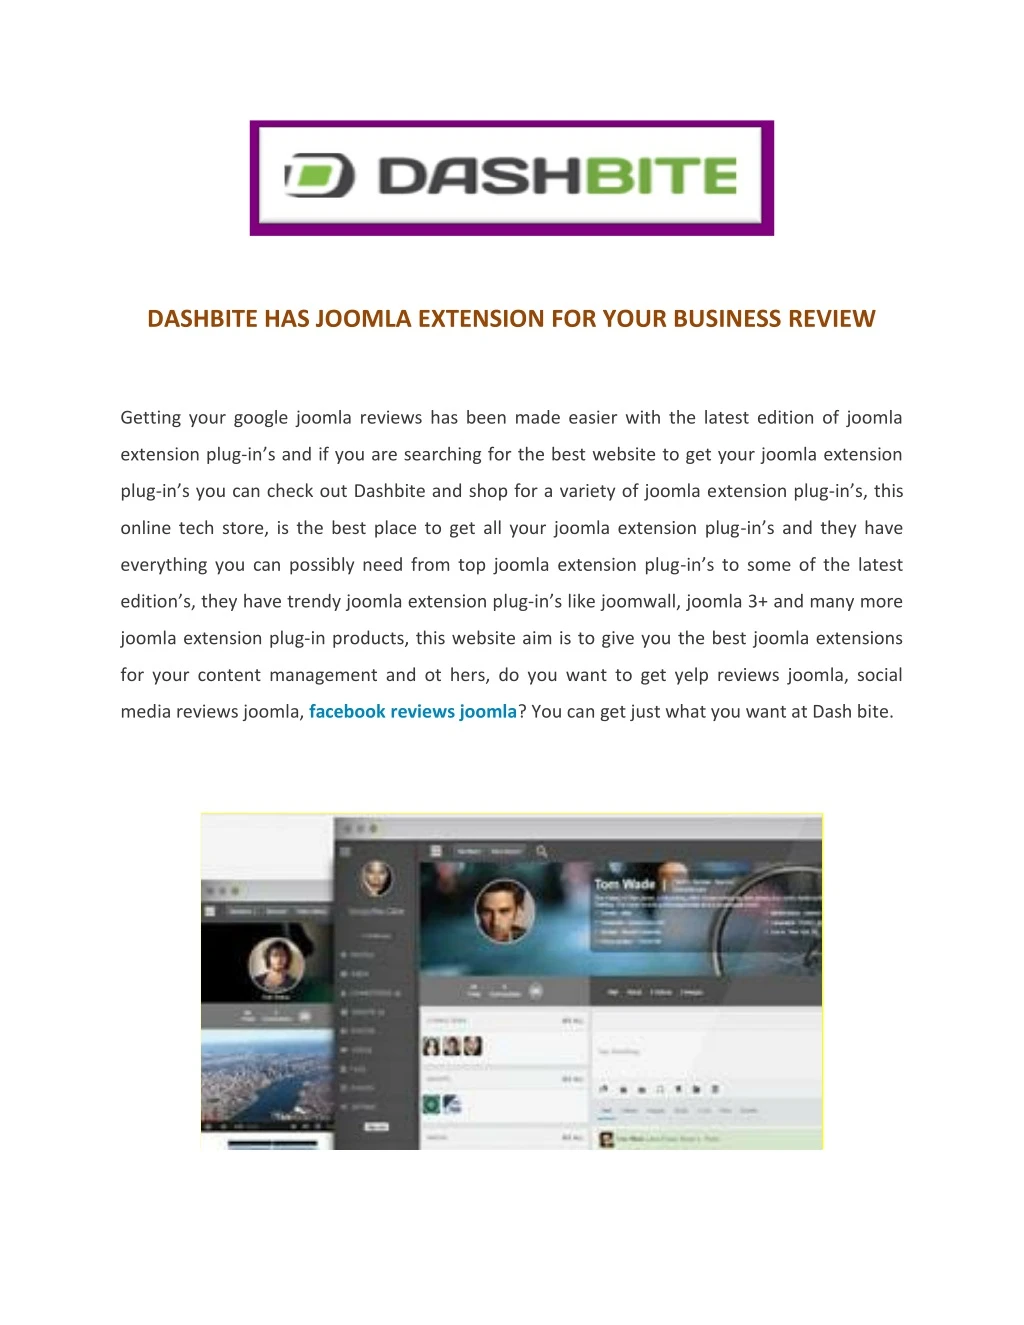 dashbite has joomla extension for your business